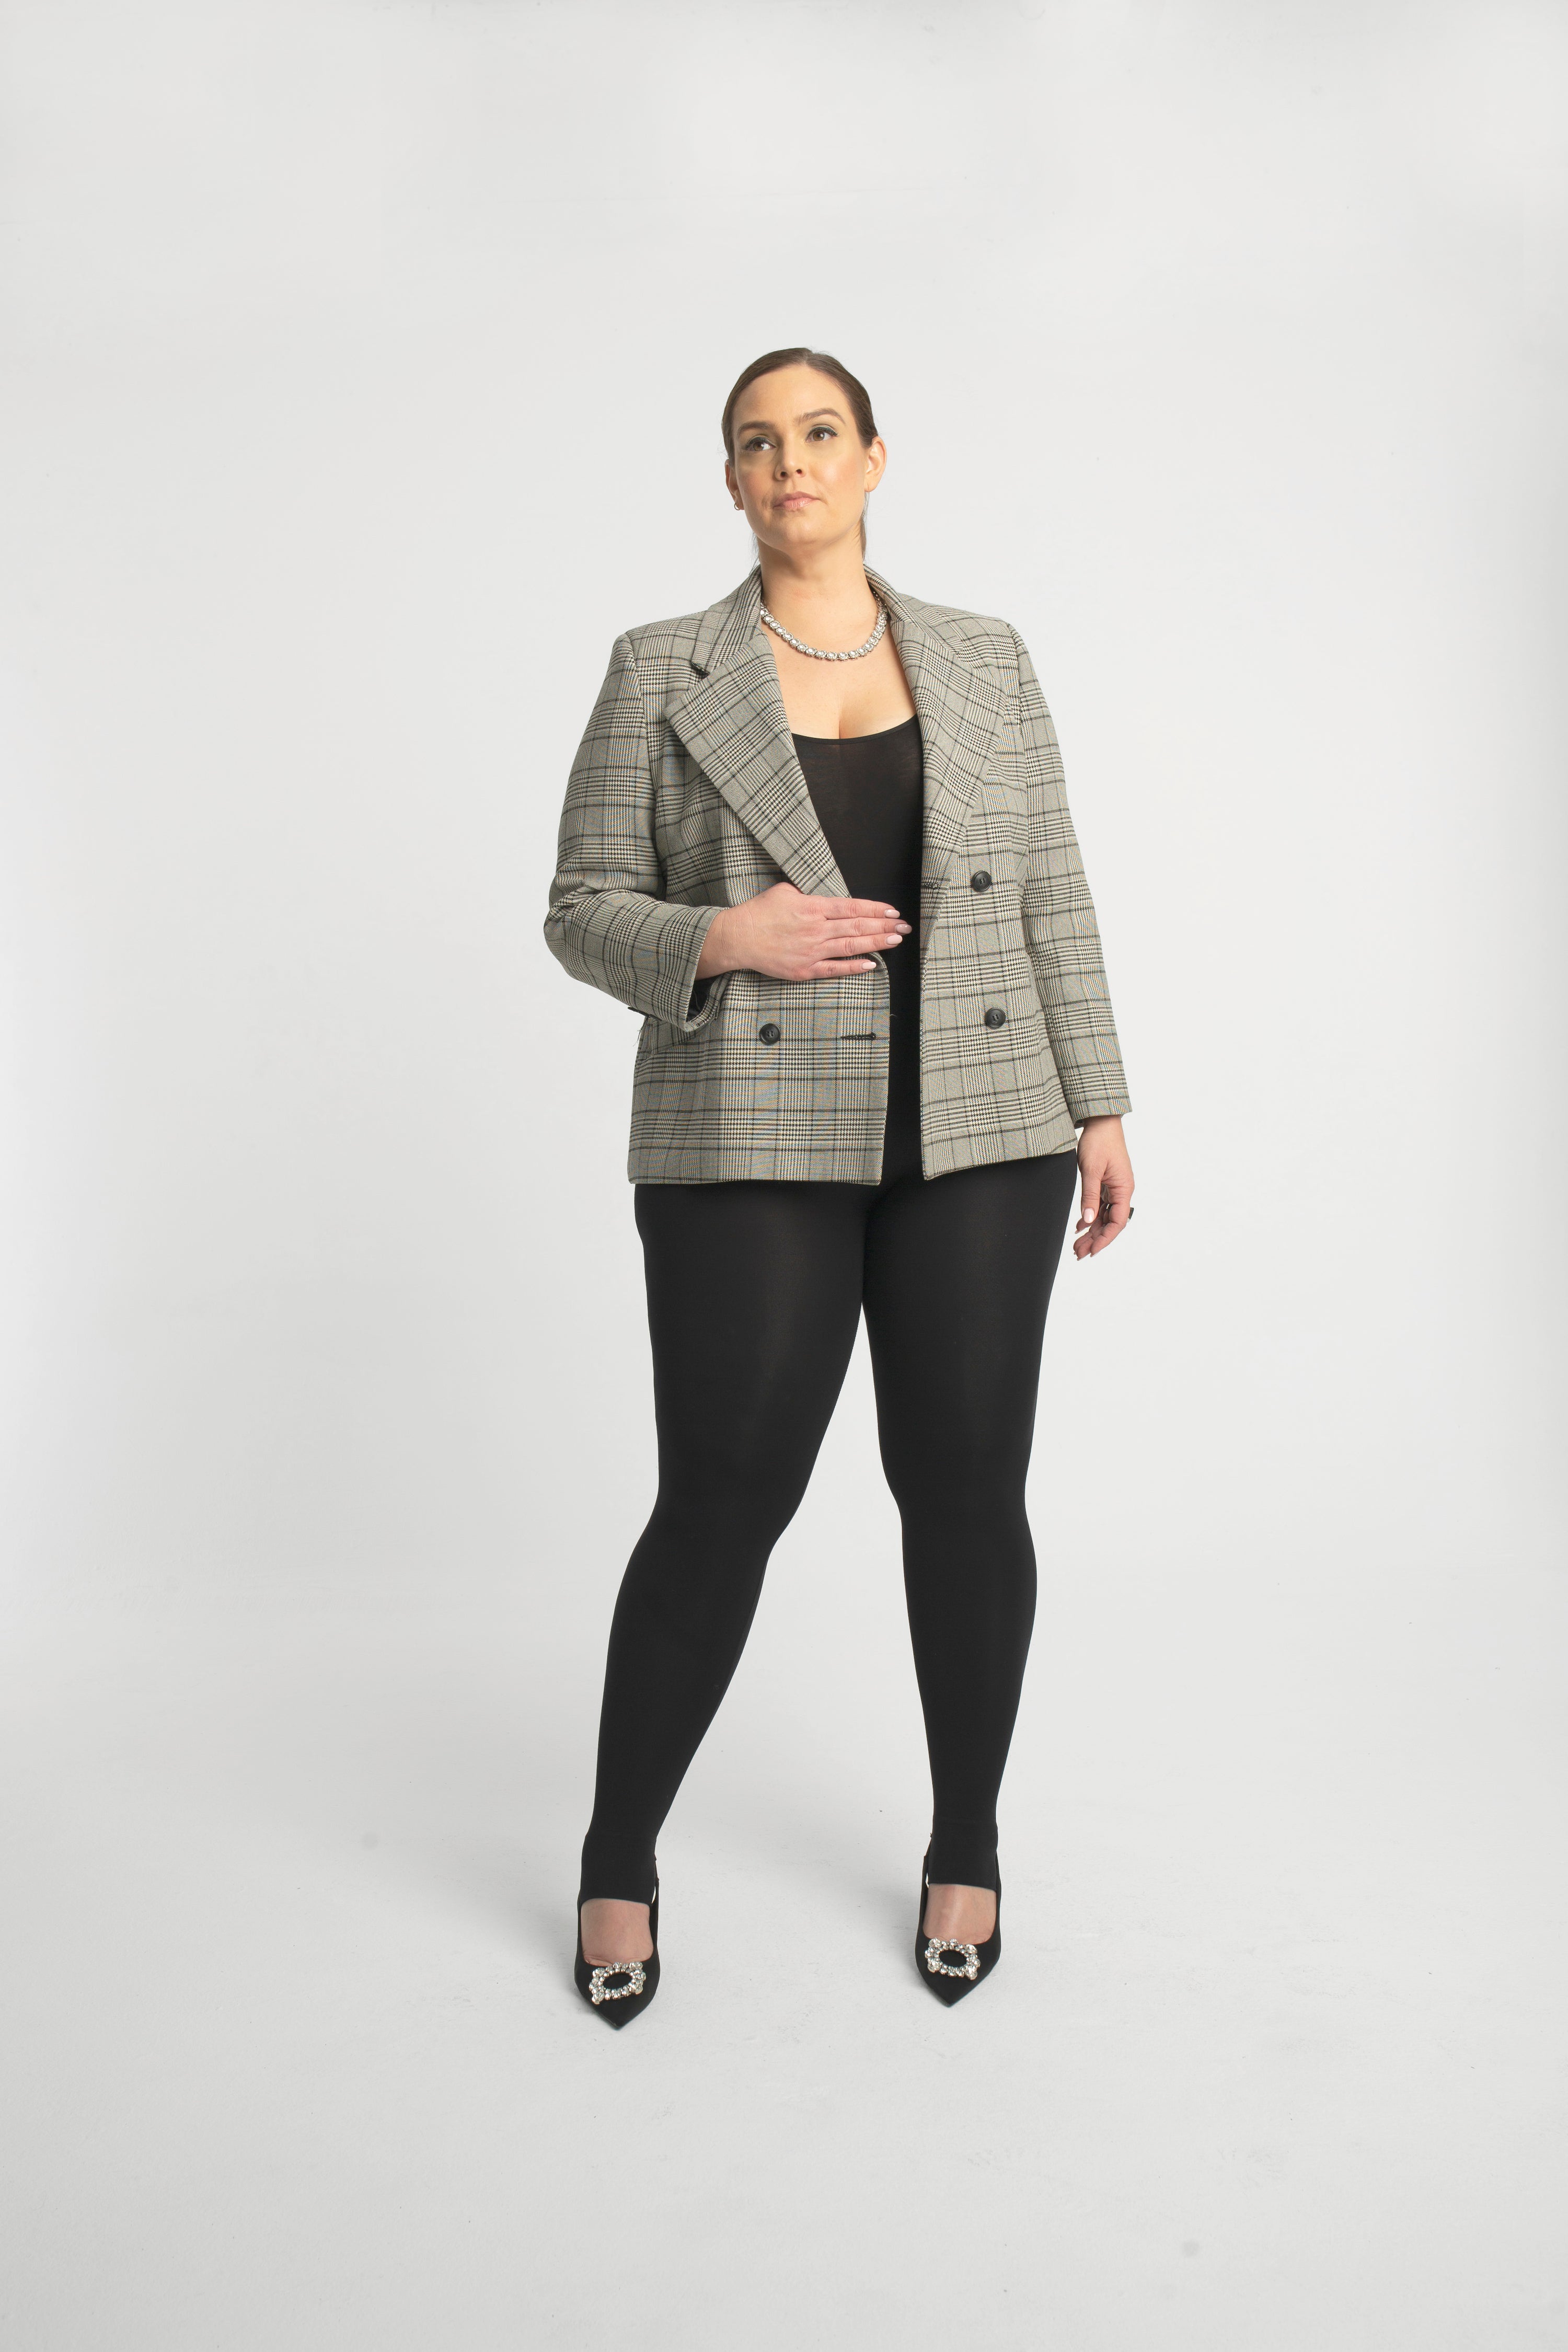 Double Breasted Blazer has a slightly oversized ﬁt.  Looks great open belted or buttoned up.  Made of a lightweight Wool blend, double-breasted with tailored shoulders. A go-anywhere wear any way favorite you will reach for from Fall through Spring. 